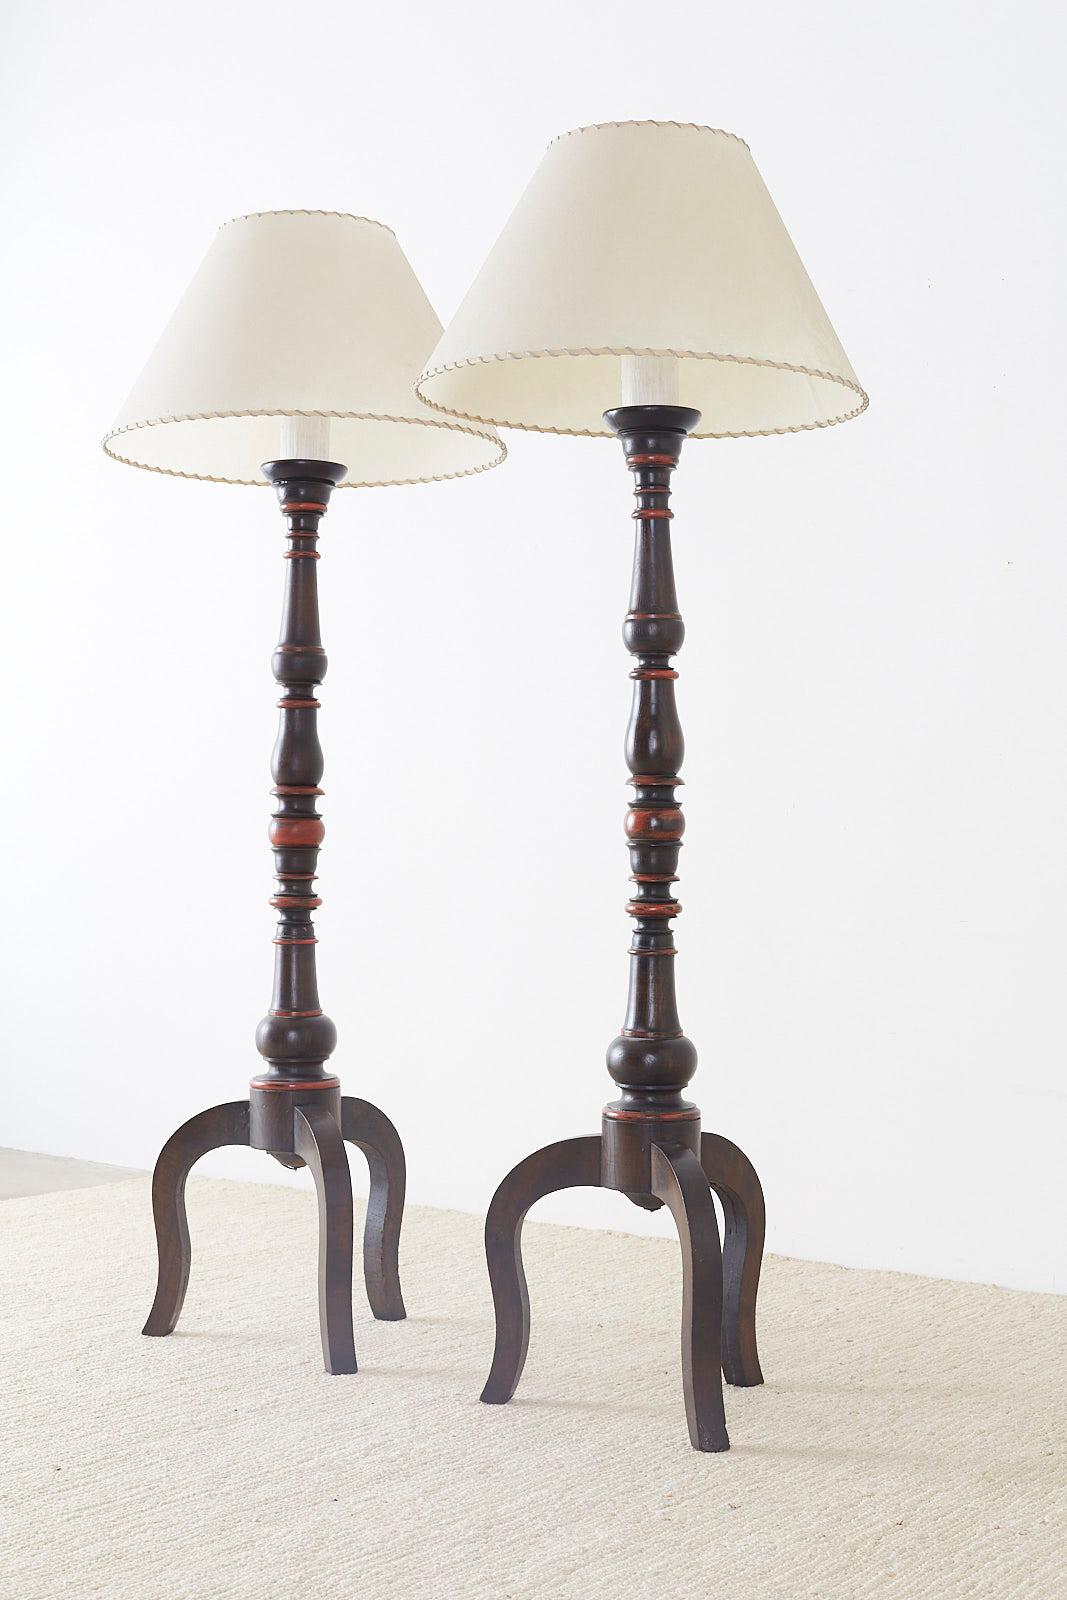 Pair of Spanish Colonial Style Wooden Candlestick Floor Lamps 4